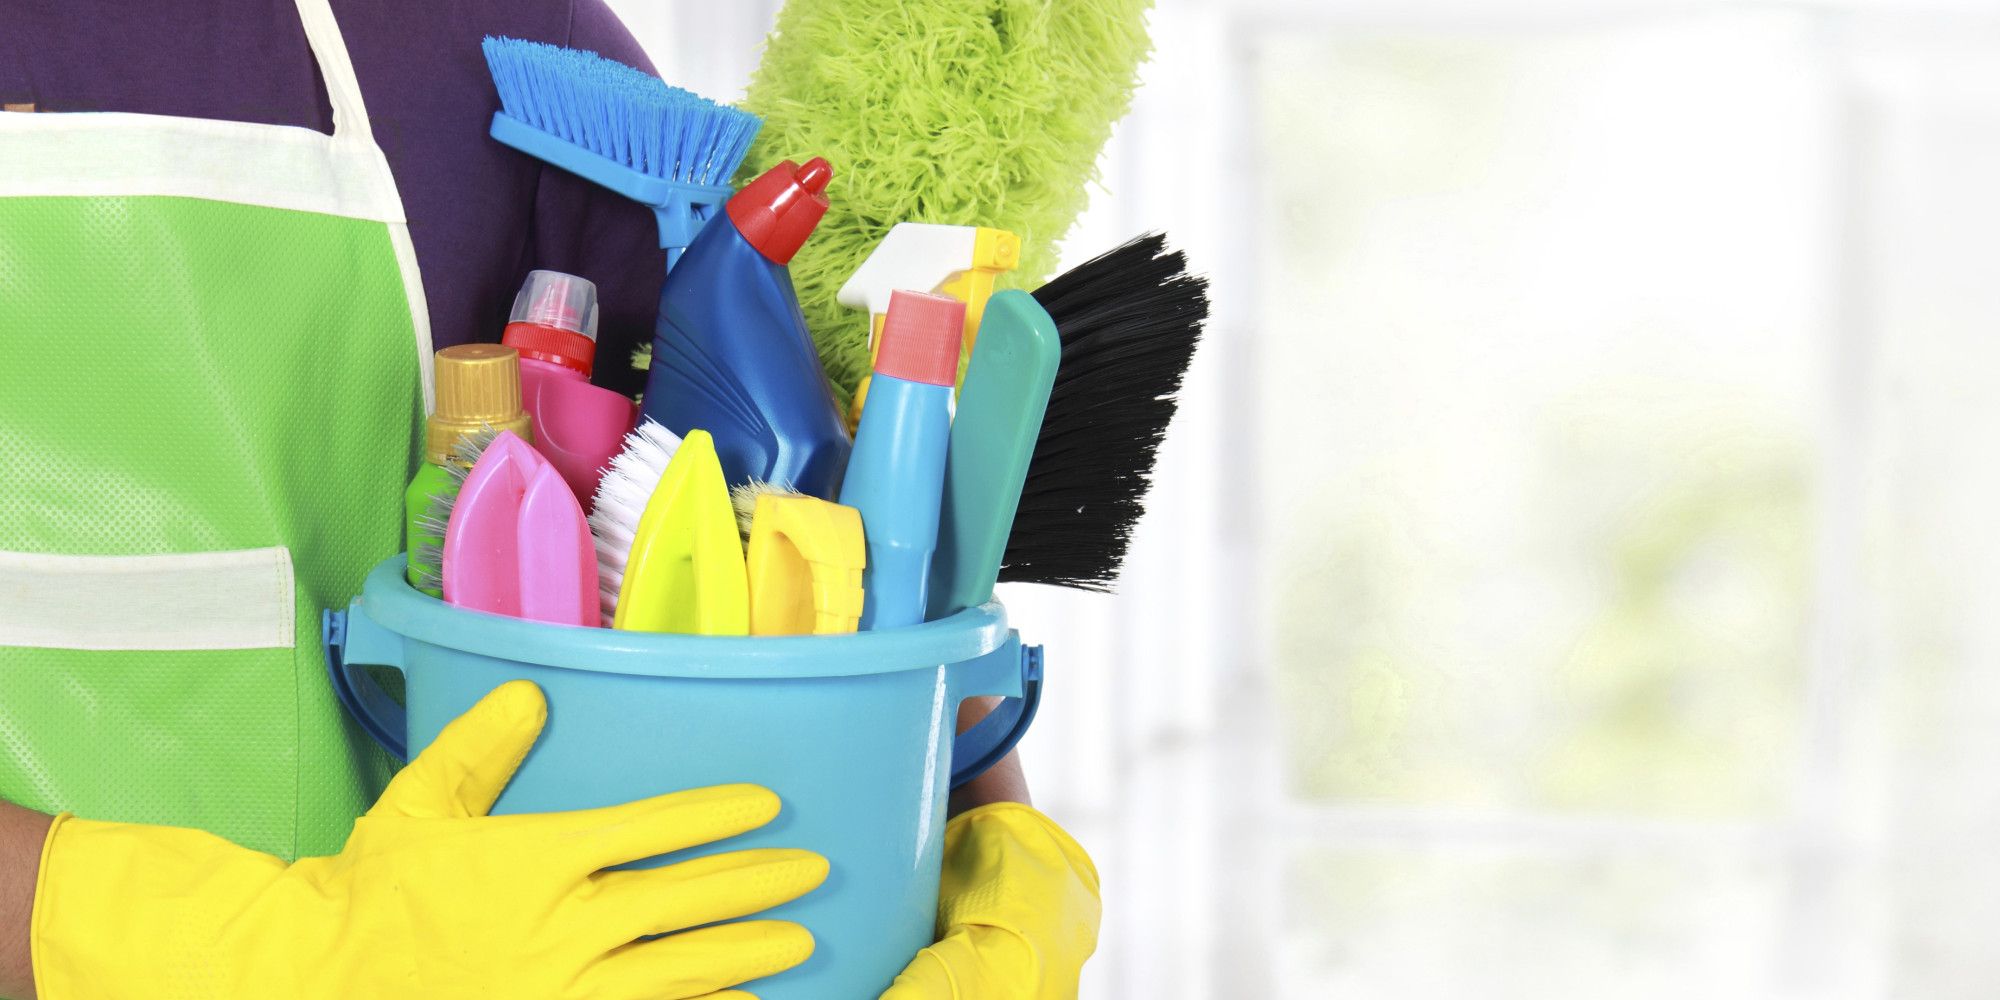 Cleaning Service Wallpaper Free Cleaning Service Background